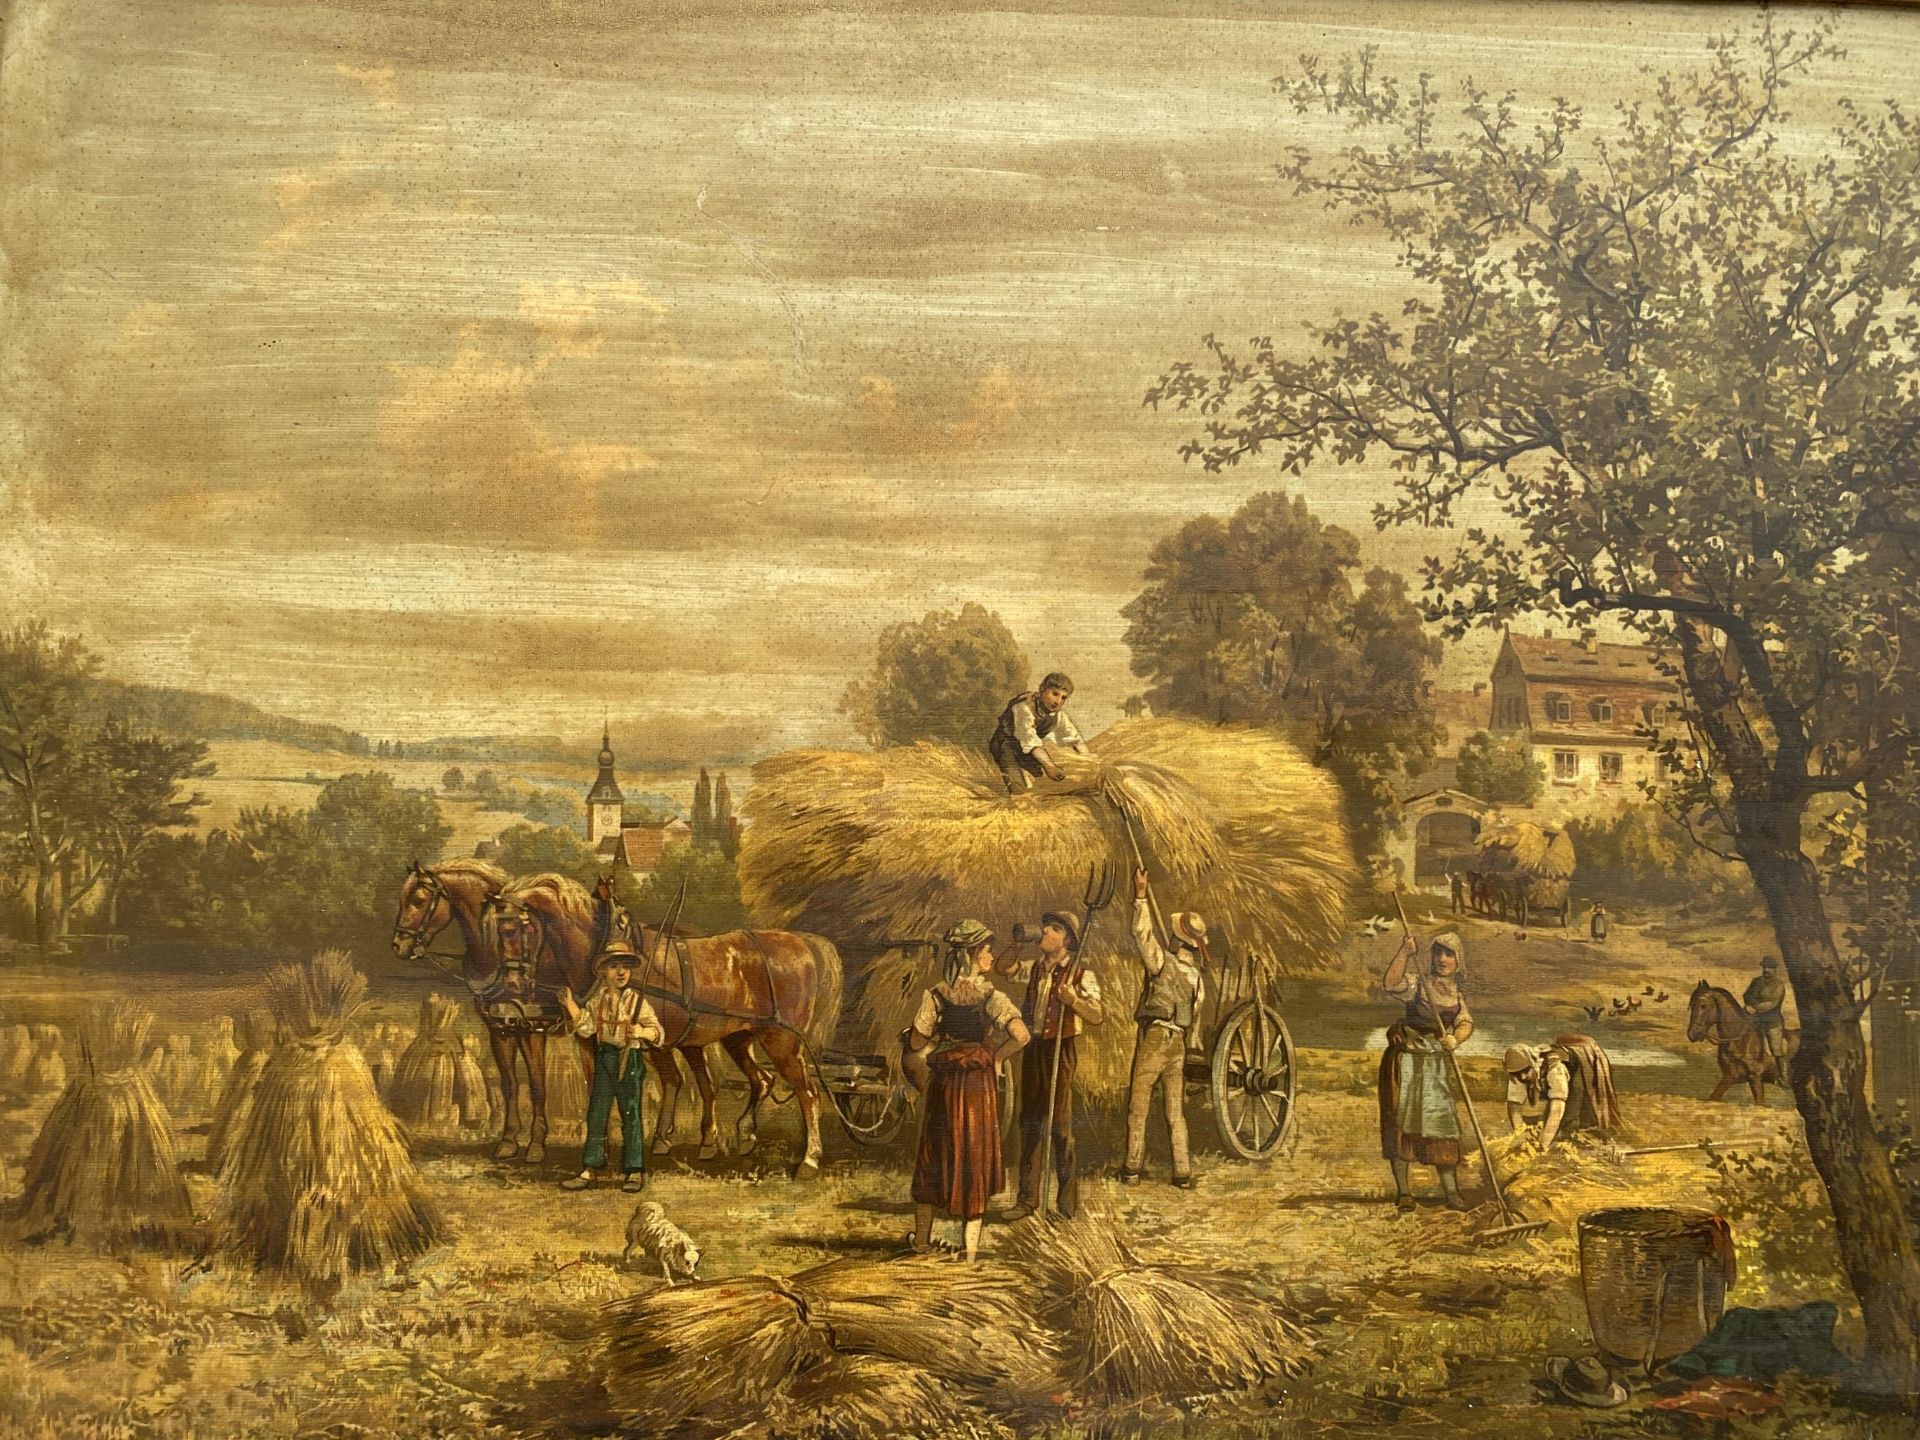 A VINTAGE PRINT ON BOARD OF A FARMING SCENE - Image 2 of 4